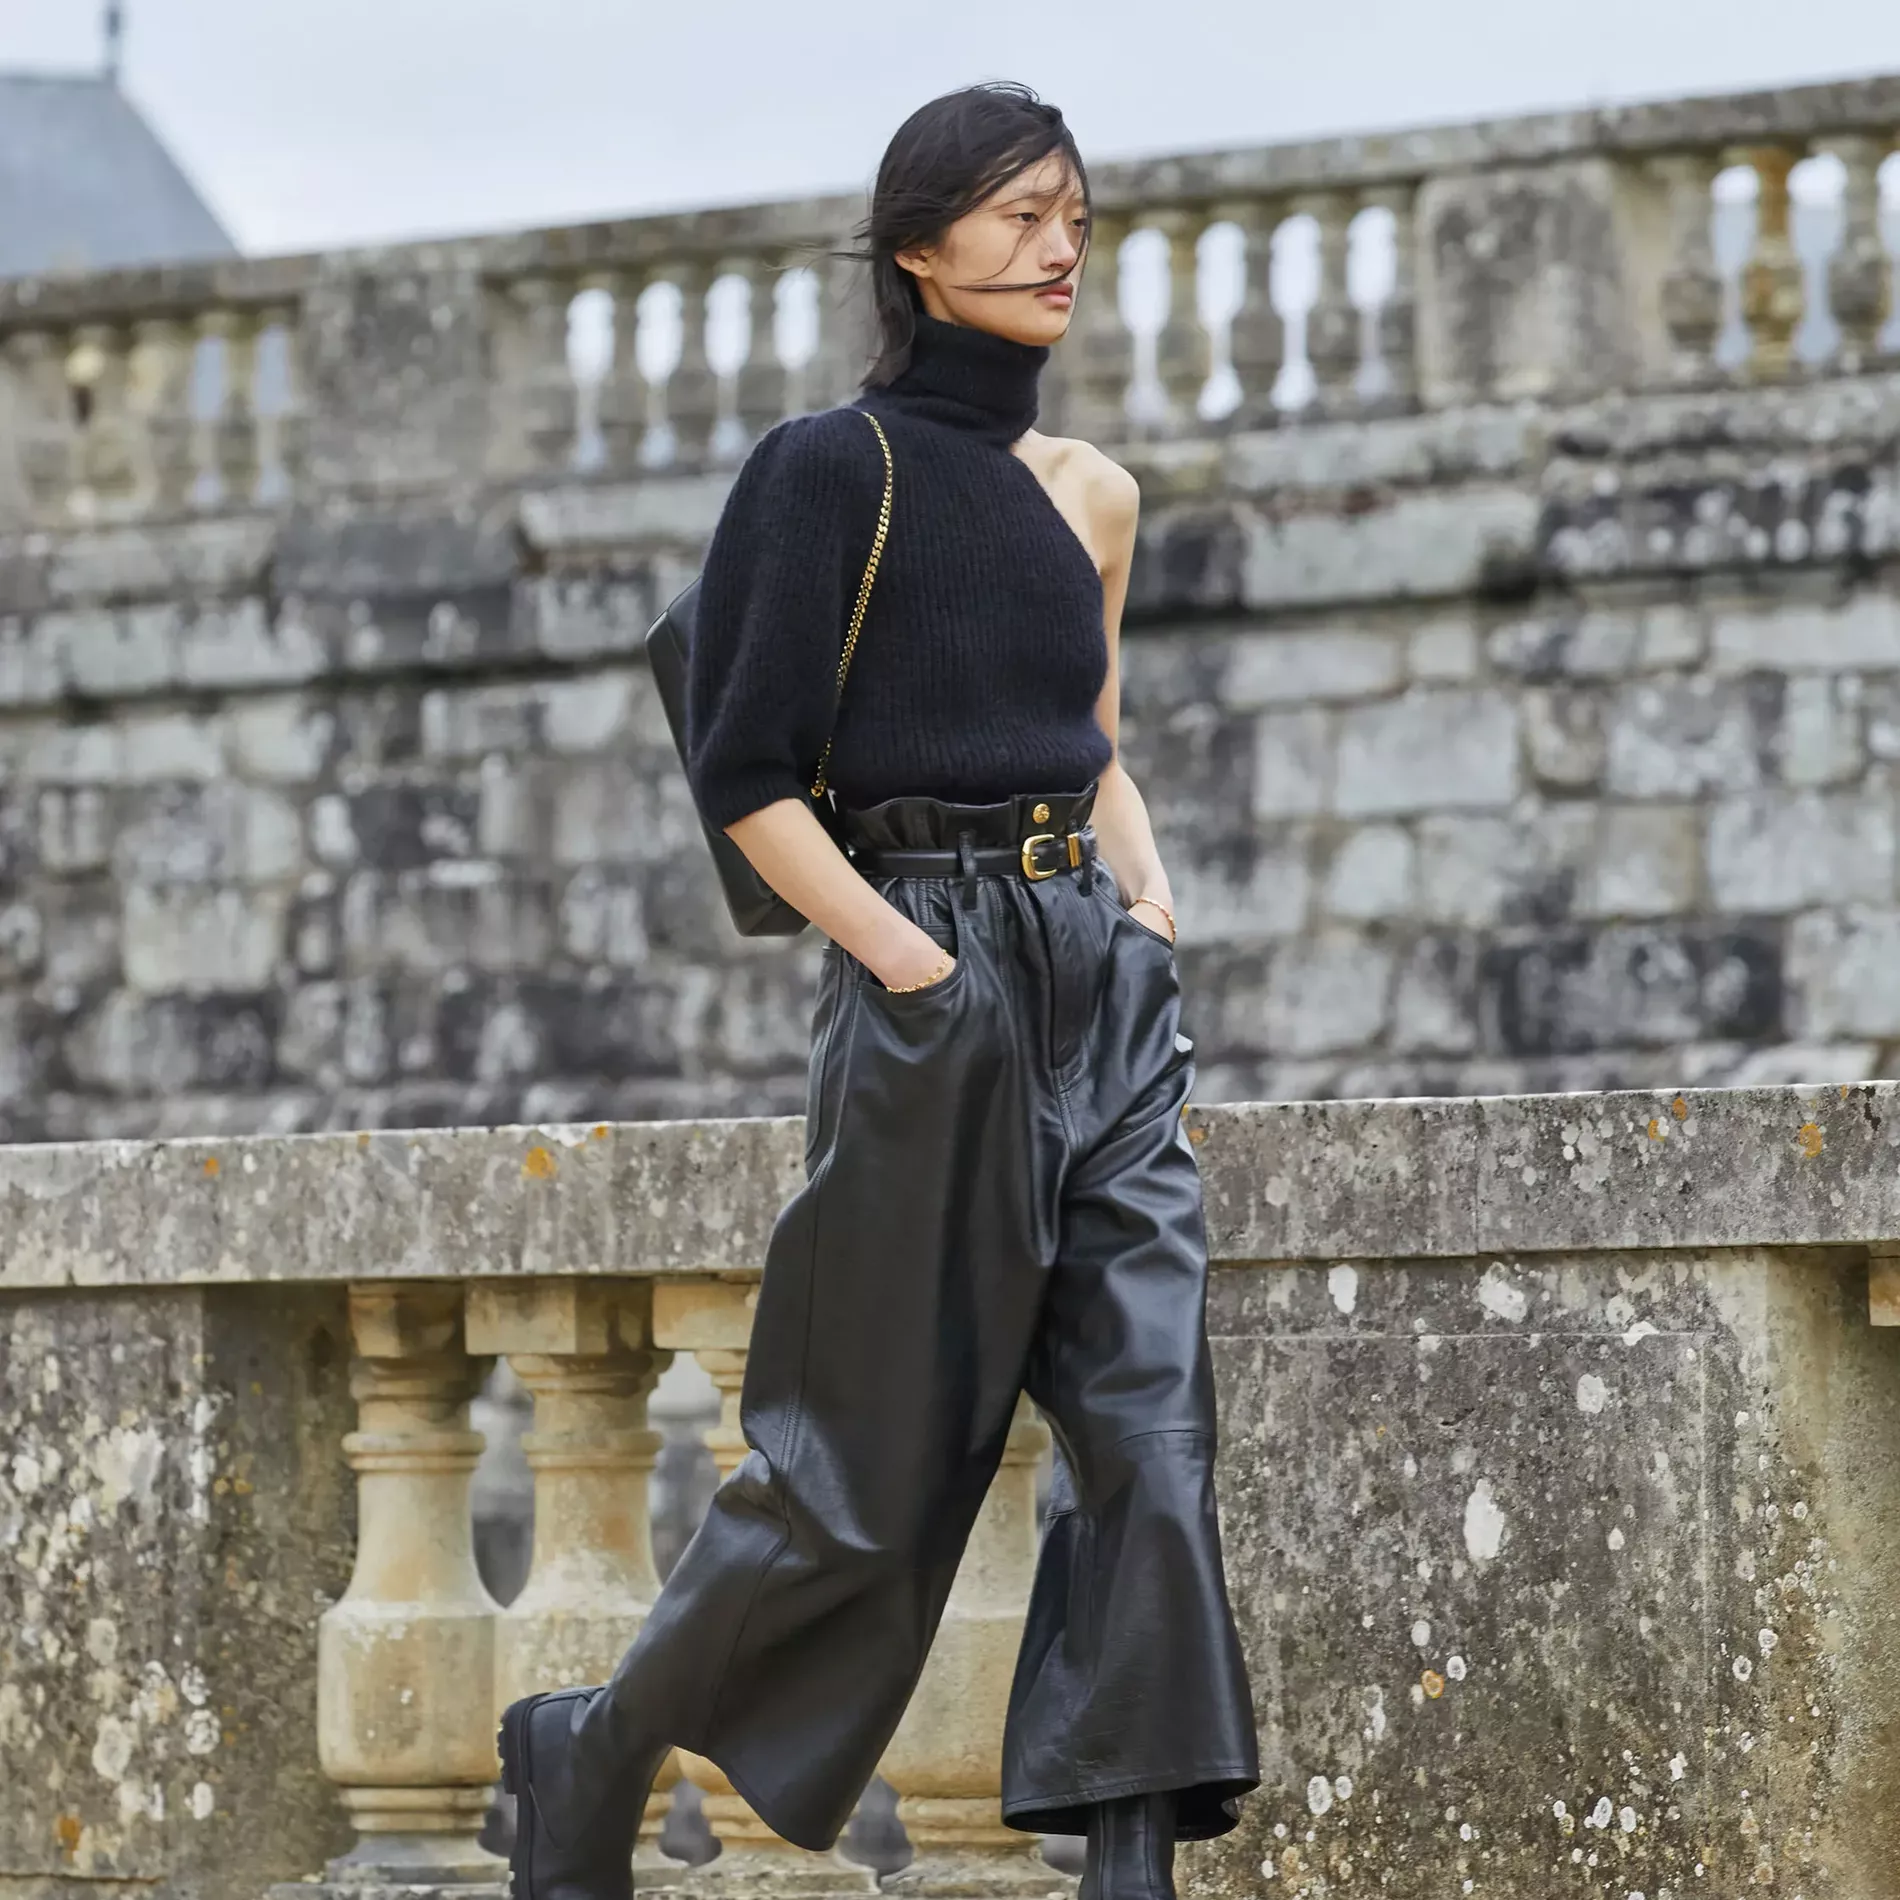 Black Leather Pants To Wear This Fall 2020